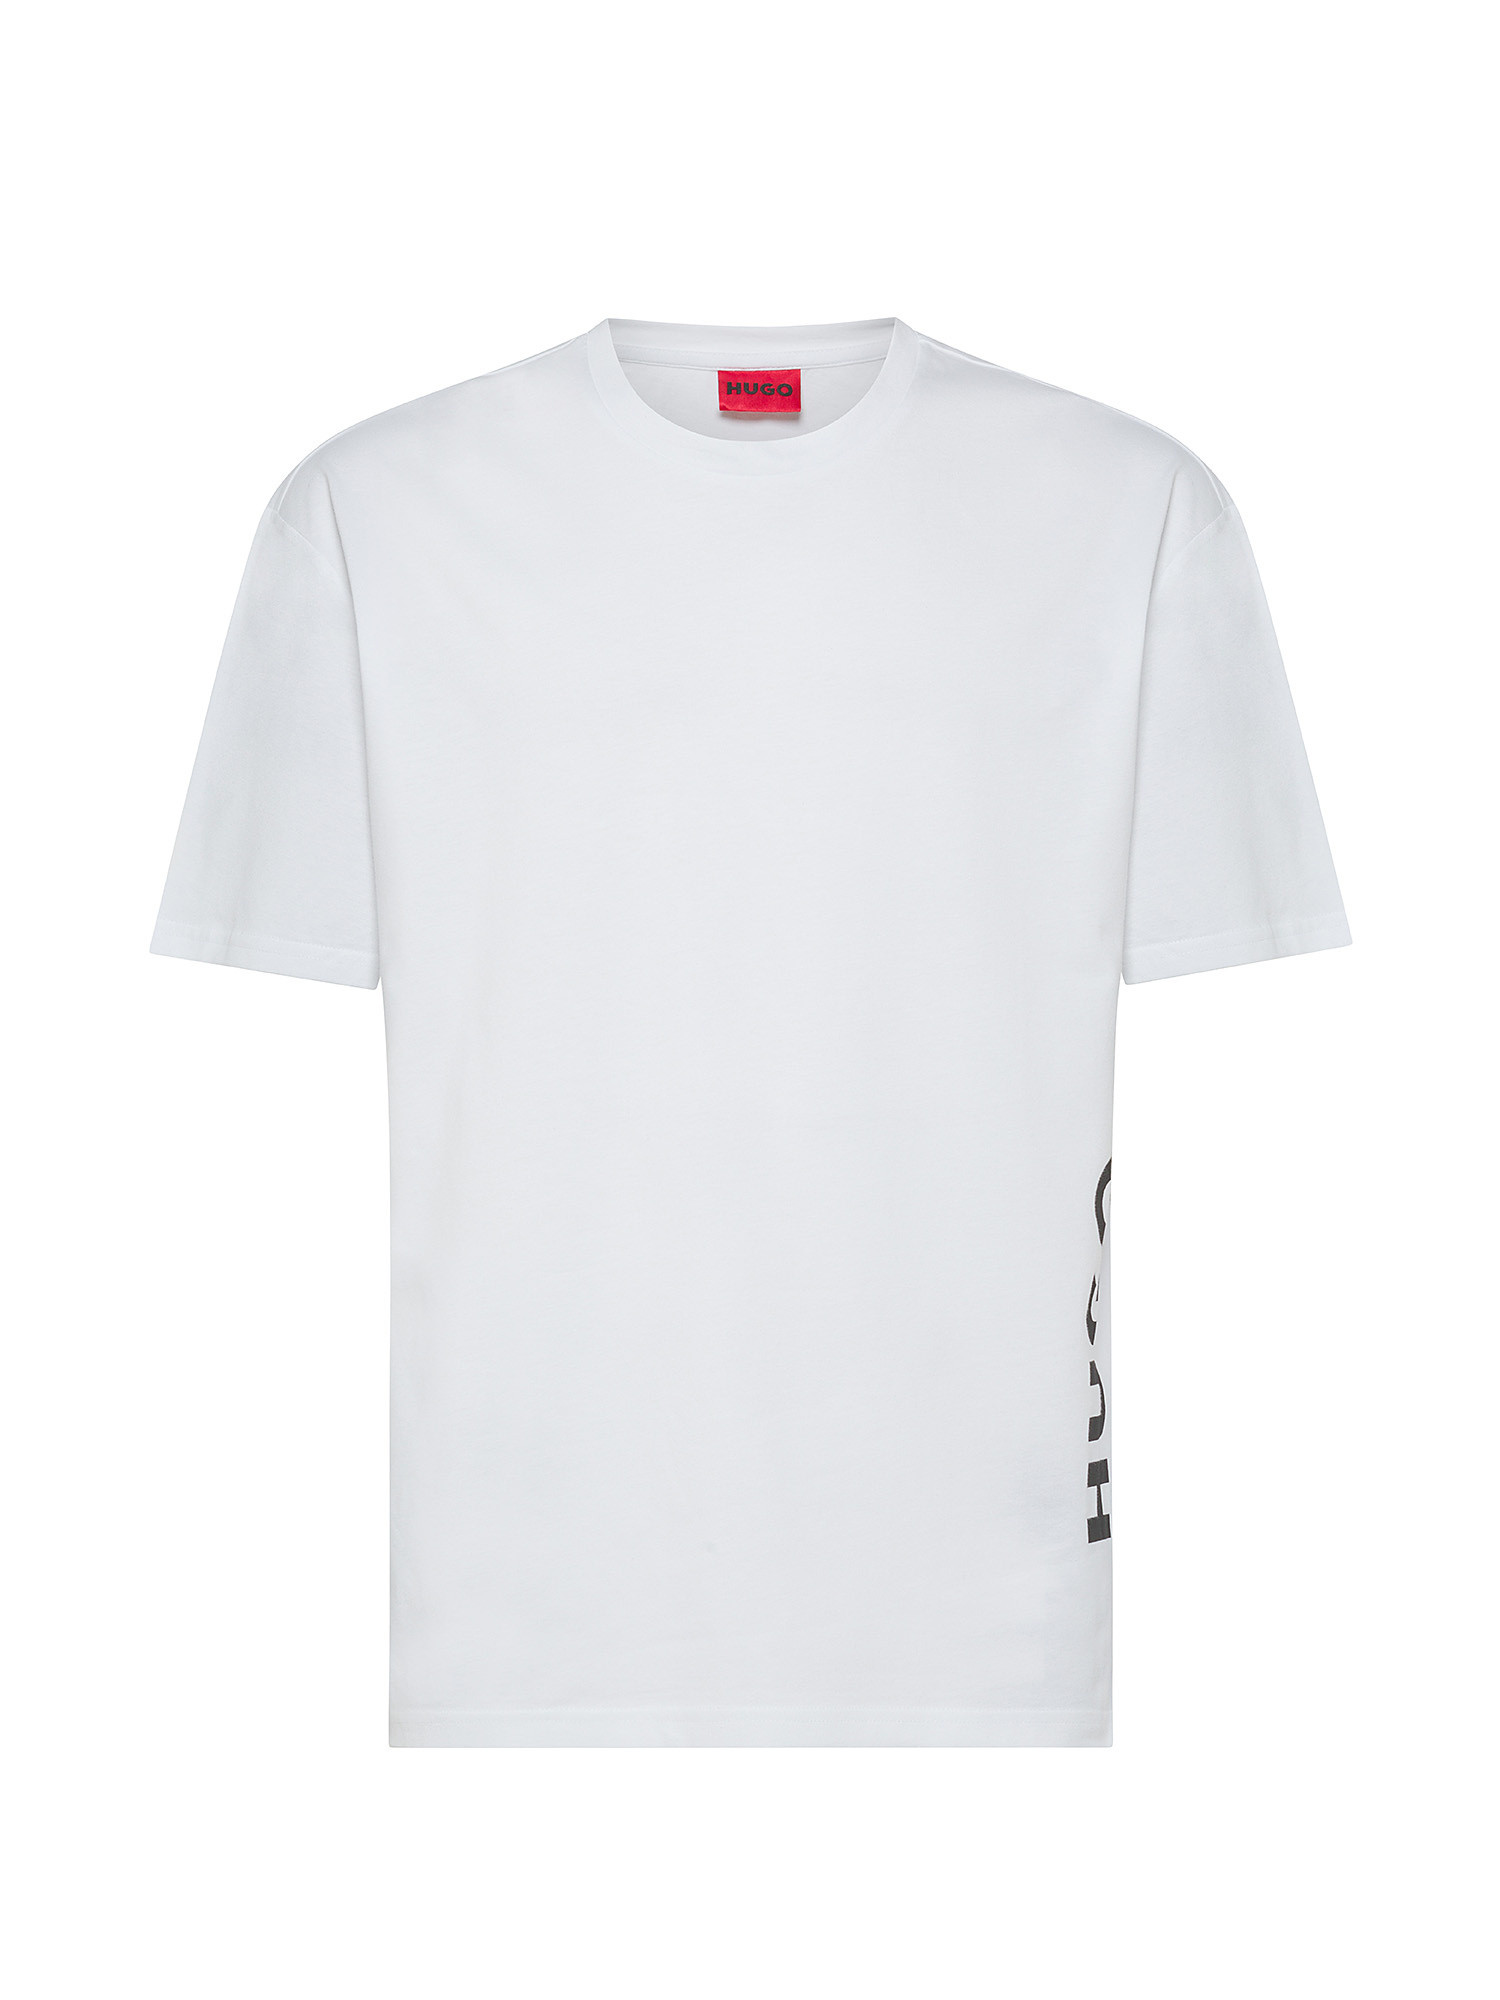 Hugo - T-shirt con stampa logo in cotone, Bianco, large image number 0